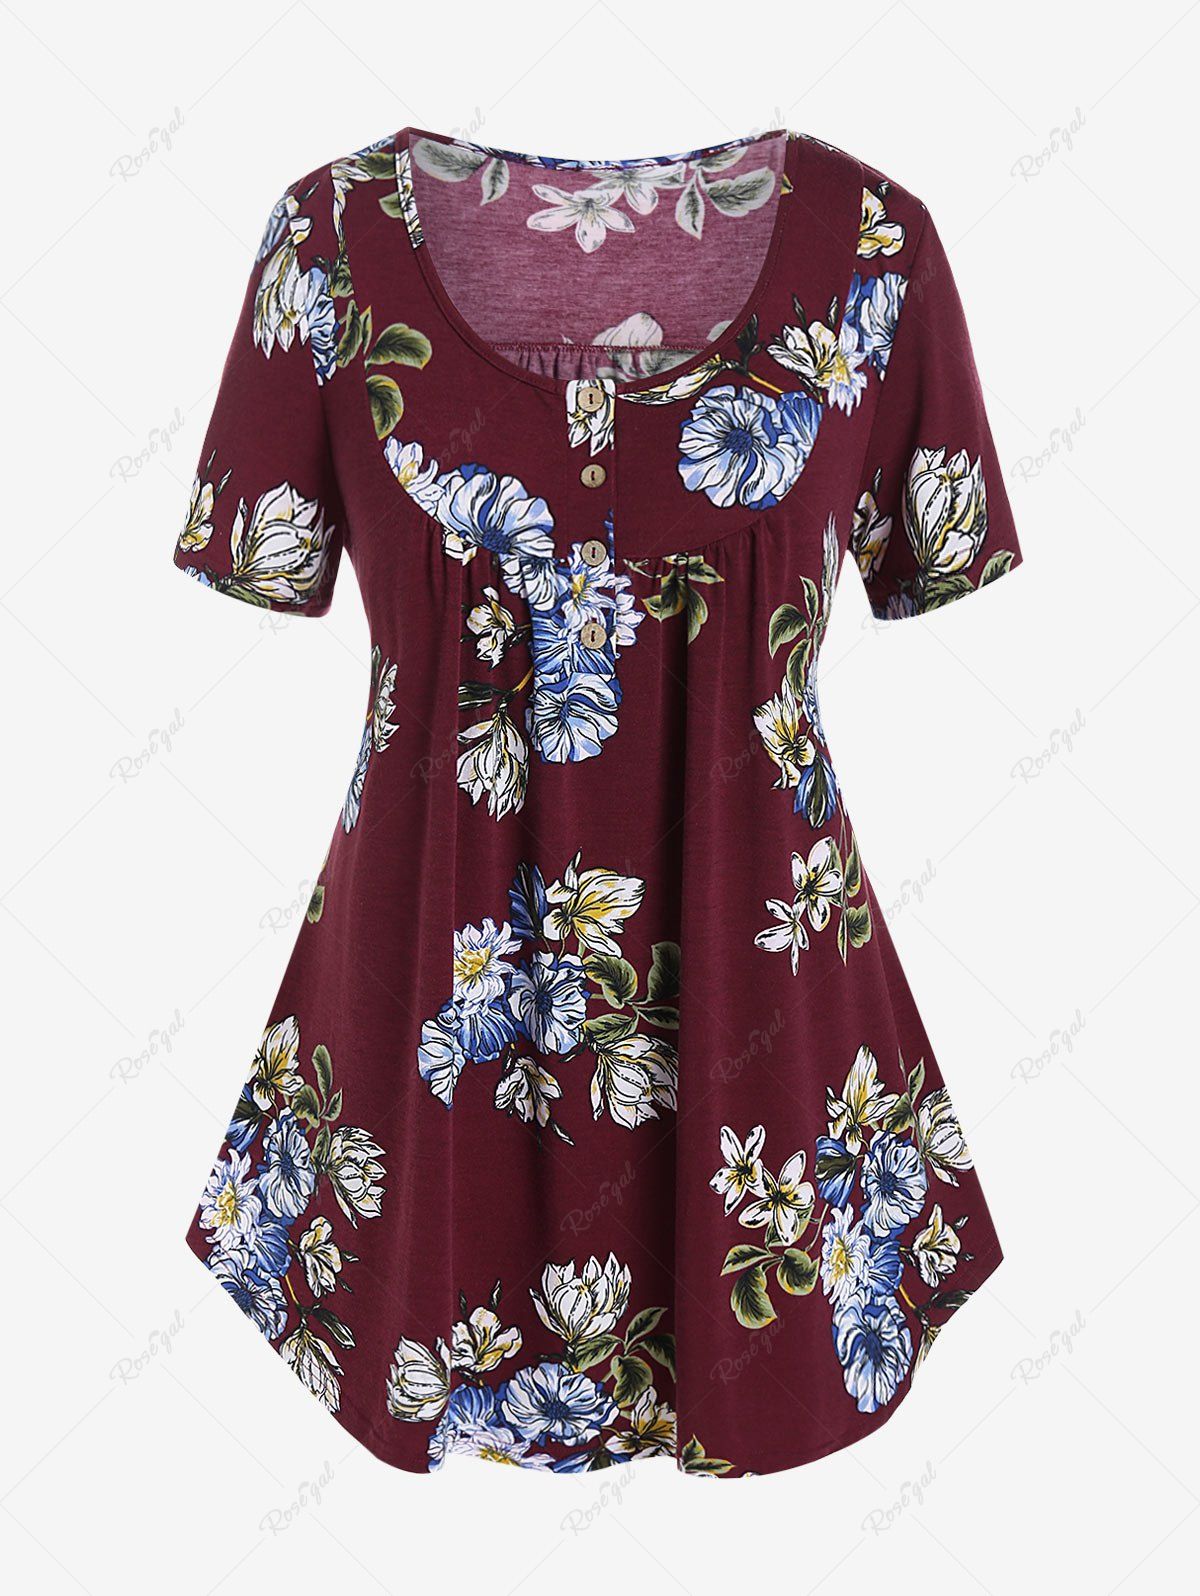 Cheap Plus Size Floral Scoop Neck Tunic Tee  